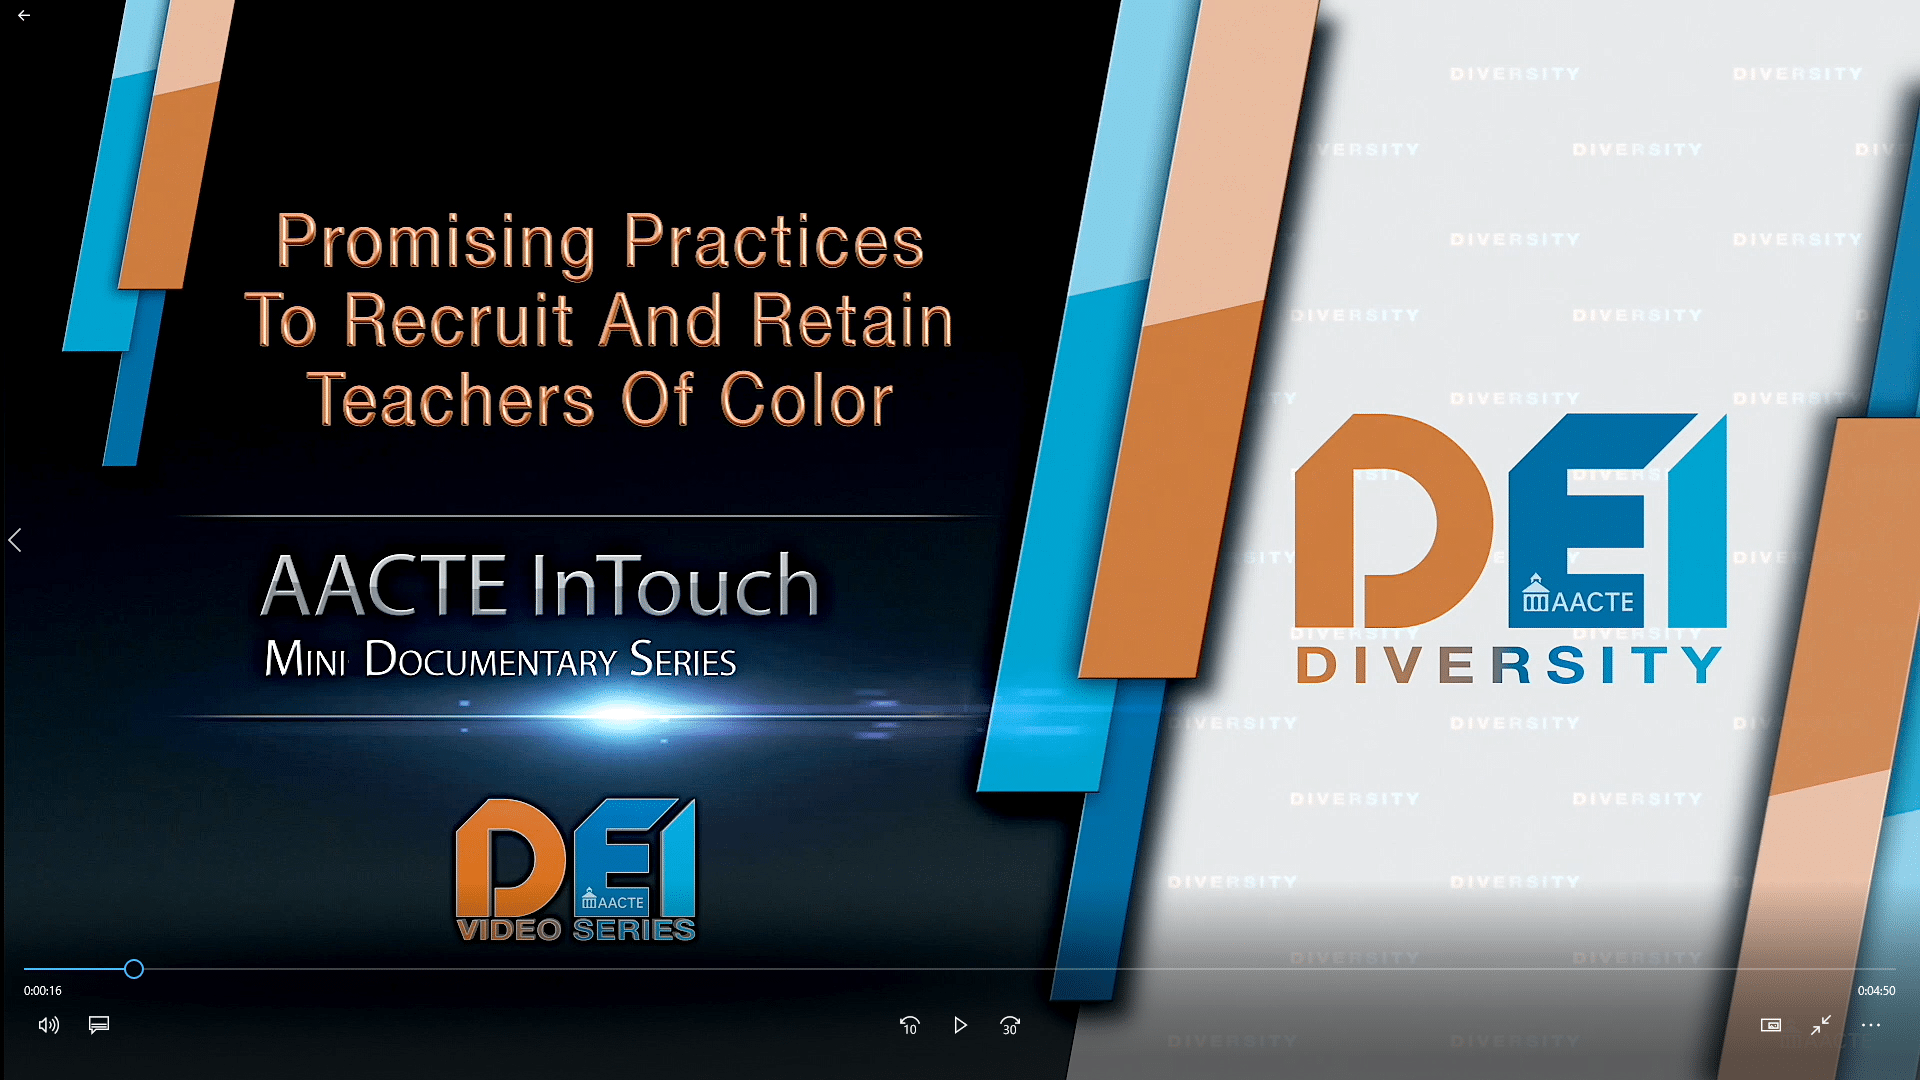 Promising Practices to Recruit and Retain Teachers of Color